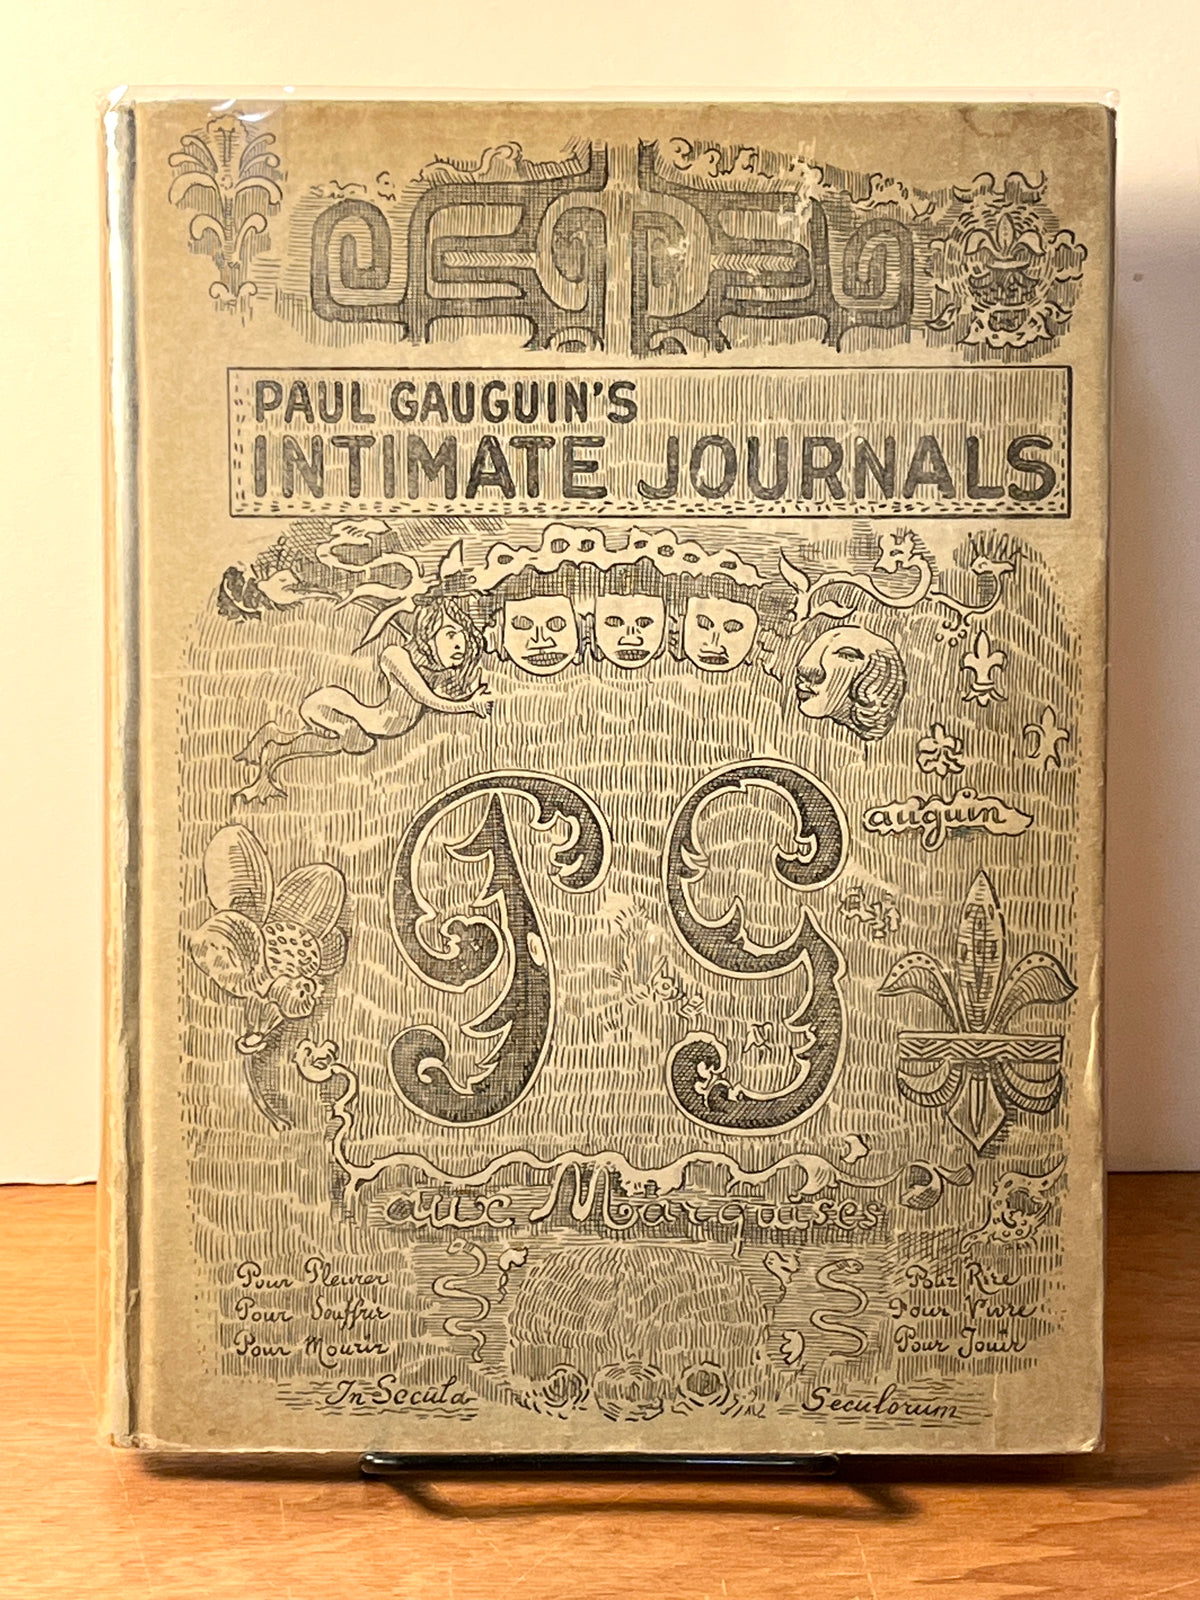 Paul Gauguin's Intimate Journals. 1921. G HC Limited Edition Post-Impressionist Biography